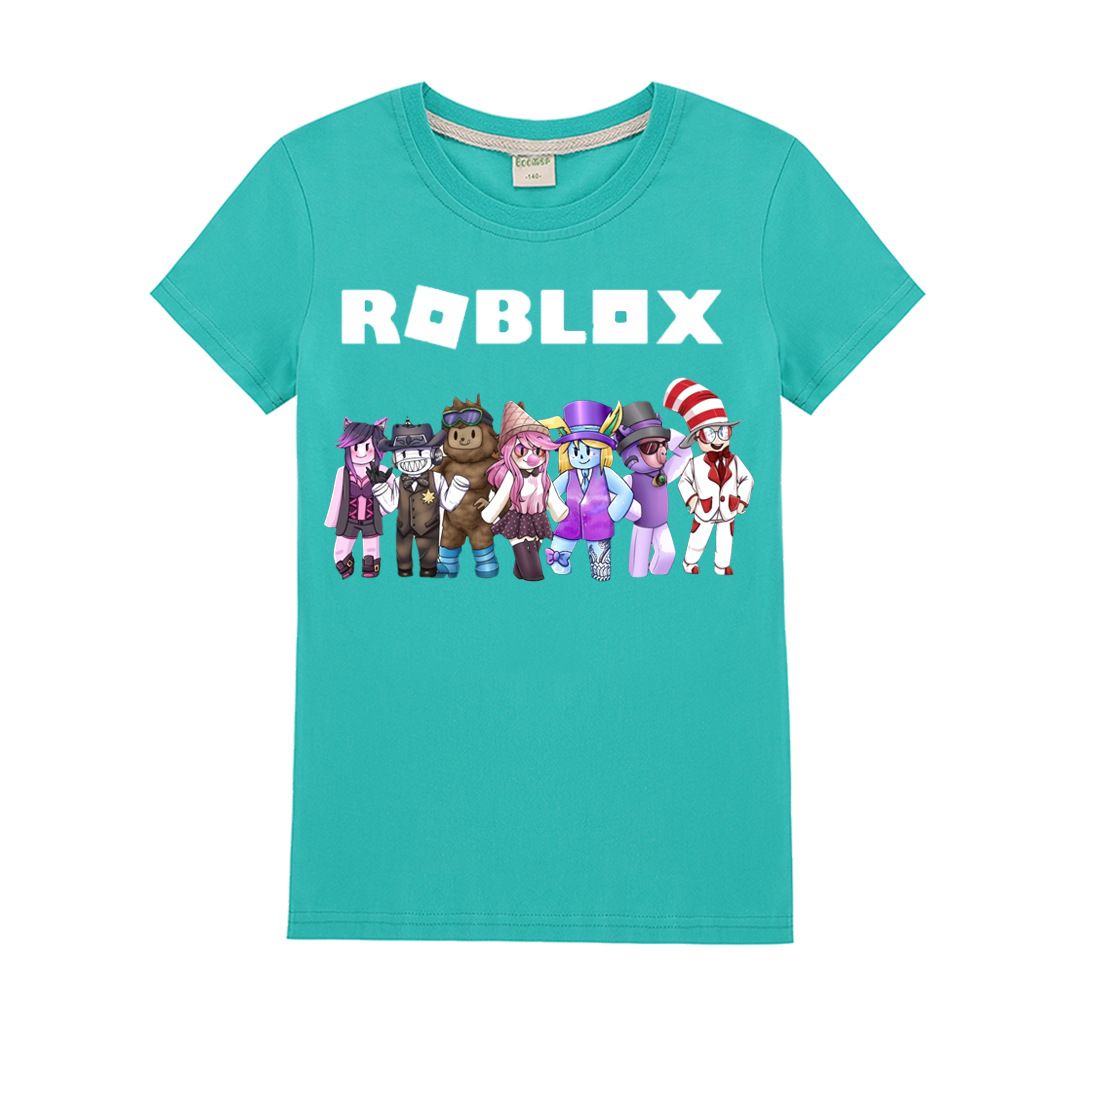 2020 Summer 2020 Roblox Tees Kids Designer Clothes Boys Teenage Girls Clothing Cotton Short Sleeve Girls Shirt T Shirt From Baby0512 13 77 Dhgate Com - 4 male roblox outfits 2019